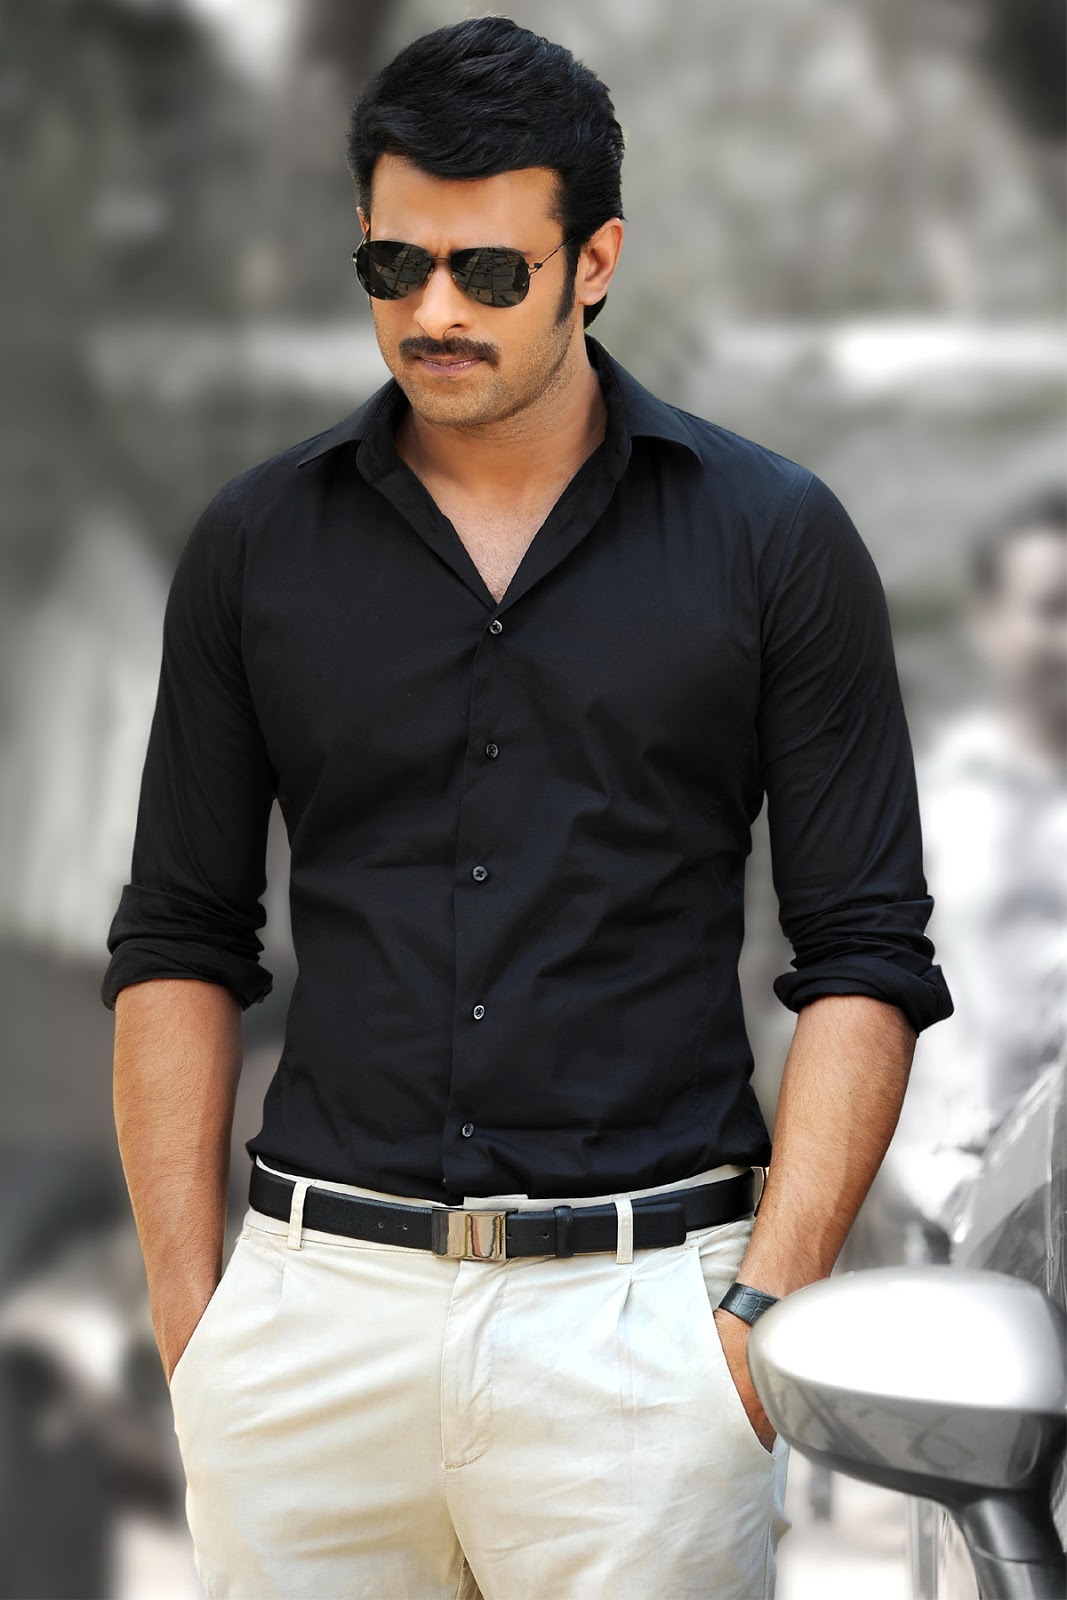 Prabhas Upcoming Movies List 2016 Release Date